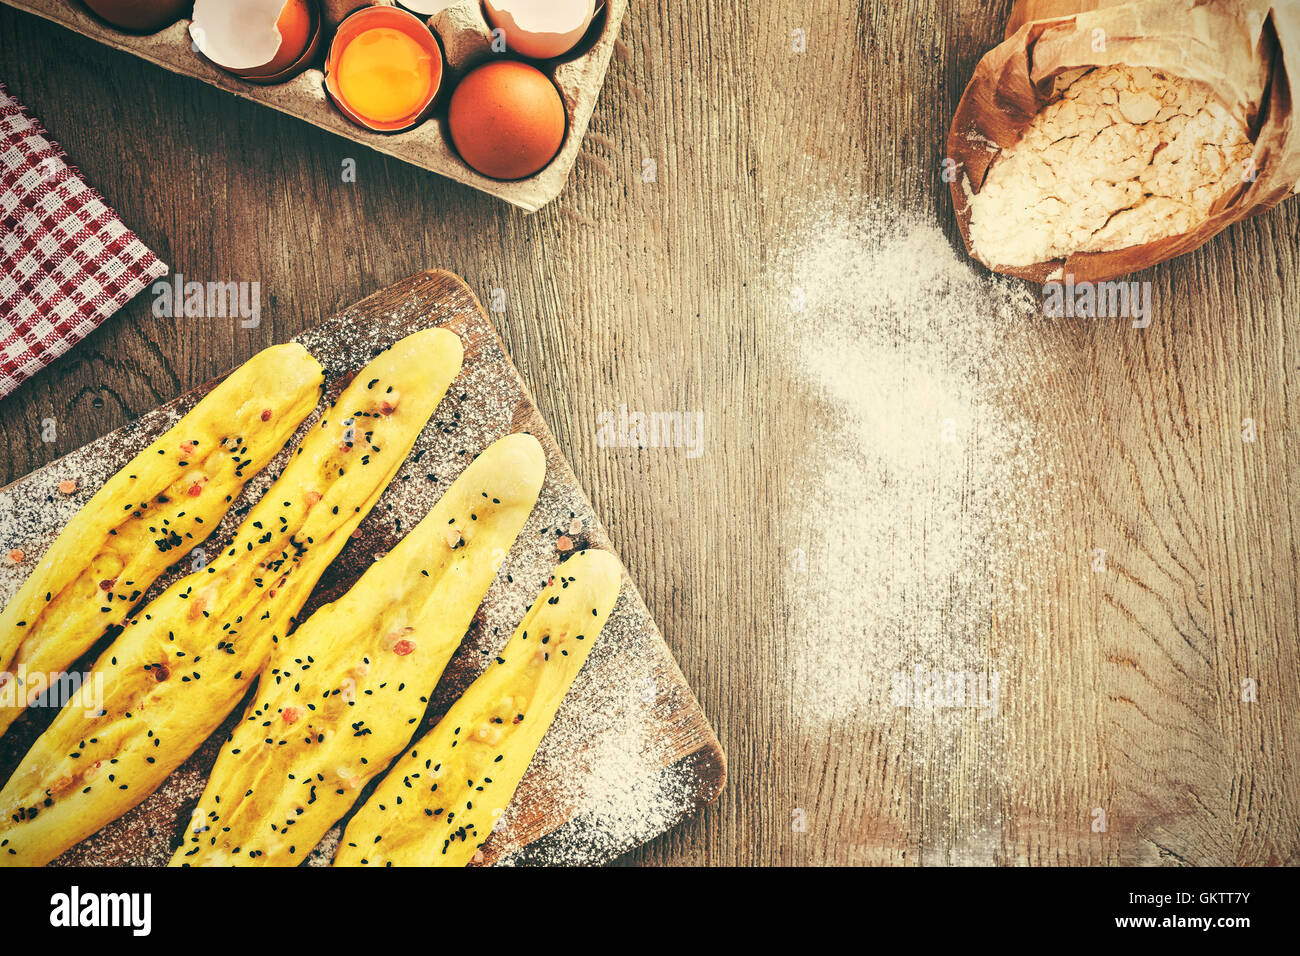 Vintage filtered raw bread sticks ready for baking, rustic setting on a wooden table, space for text. Stock Photo